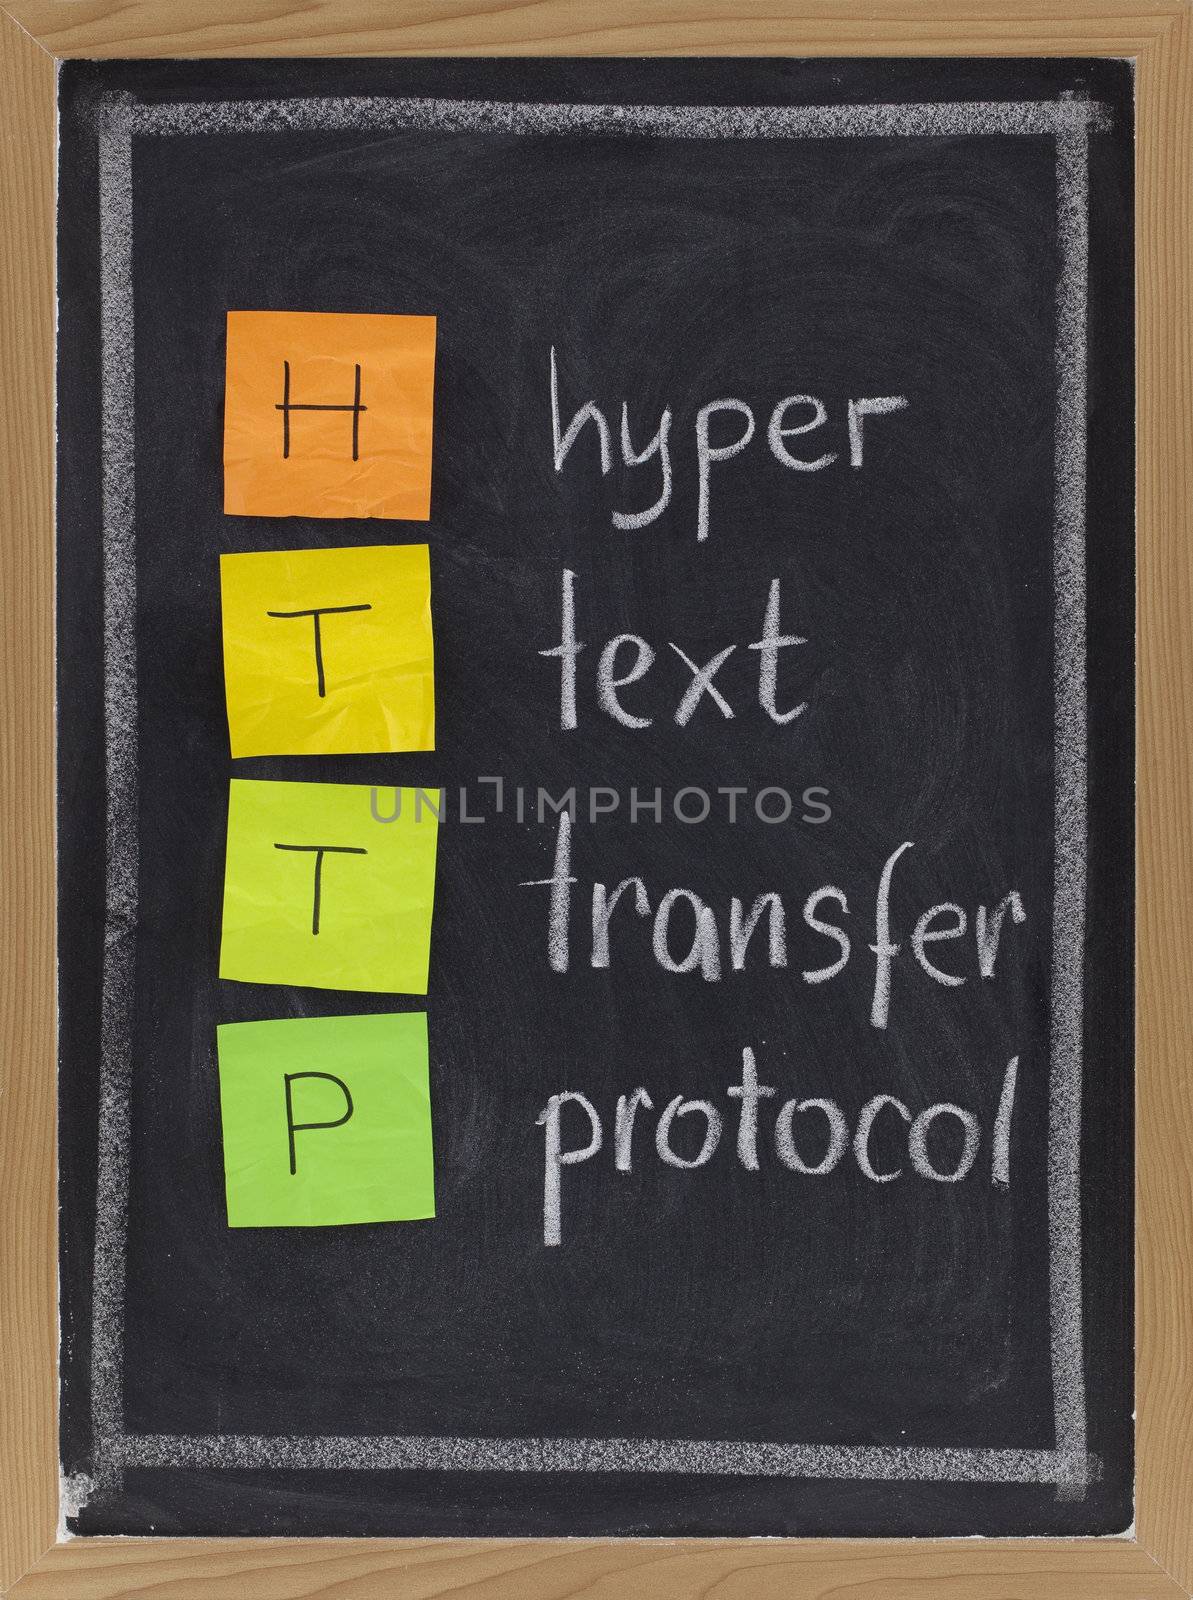 http (hyper text transfer protocol) acronym explained on blackboard, color sticky notes and white chalk handwriting